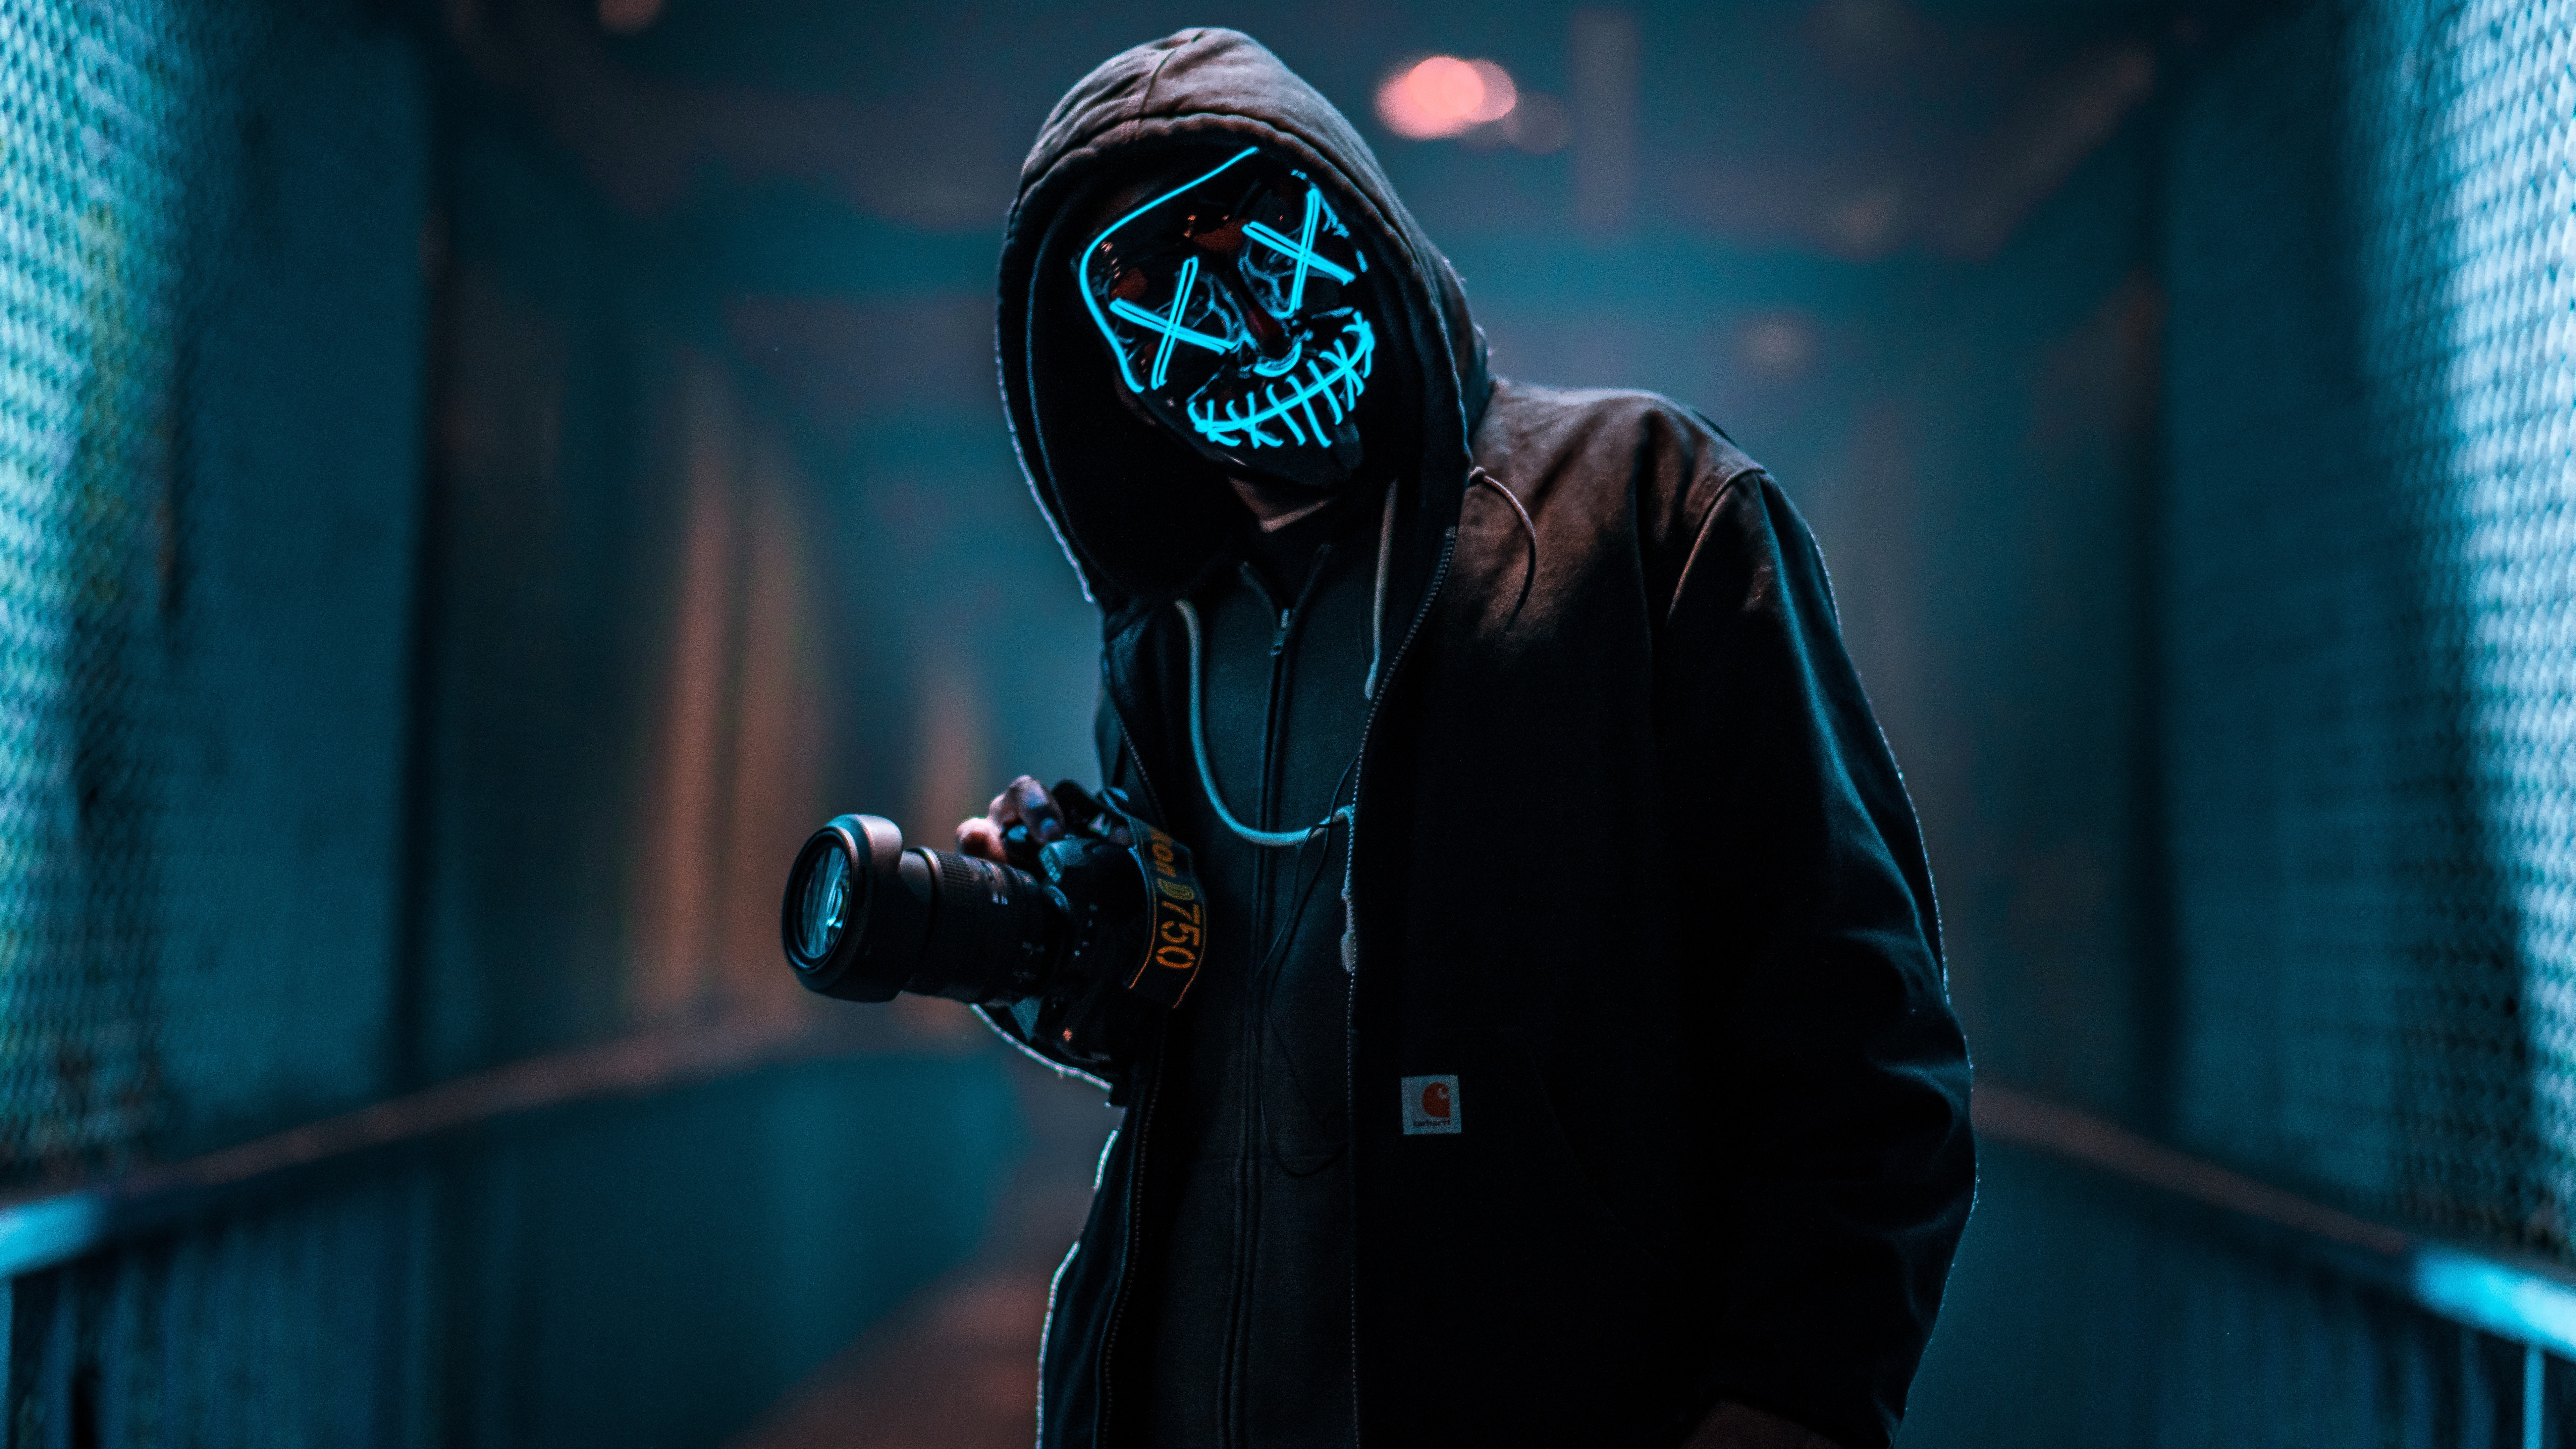 The purge p k k hd wallpapers backgrounds free download rare gallery